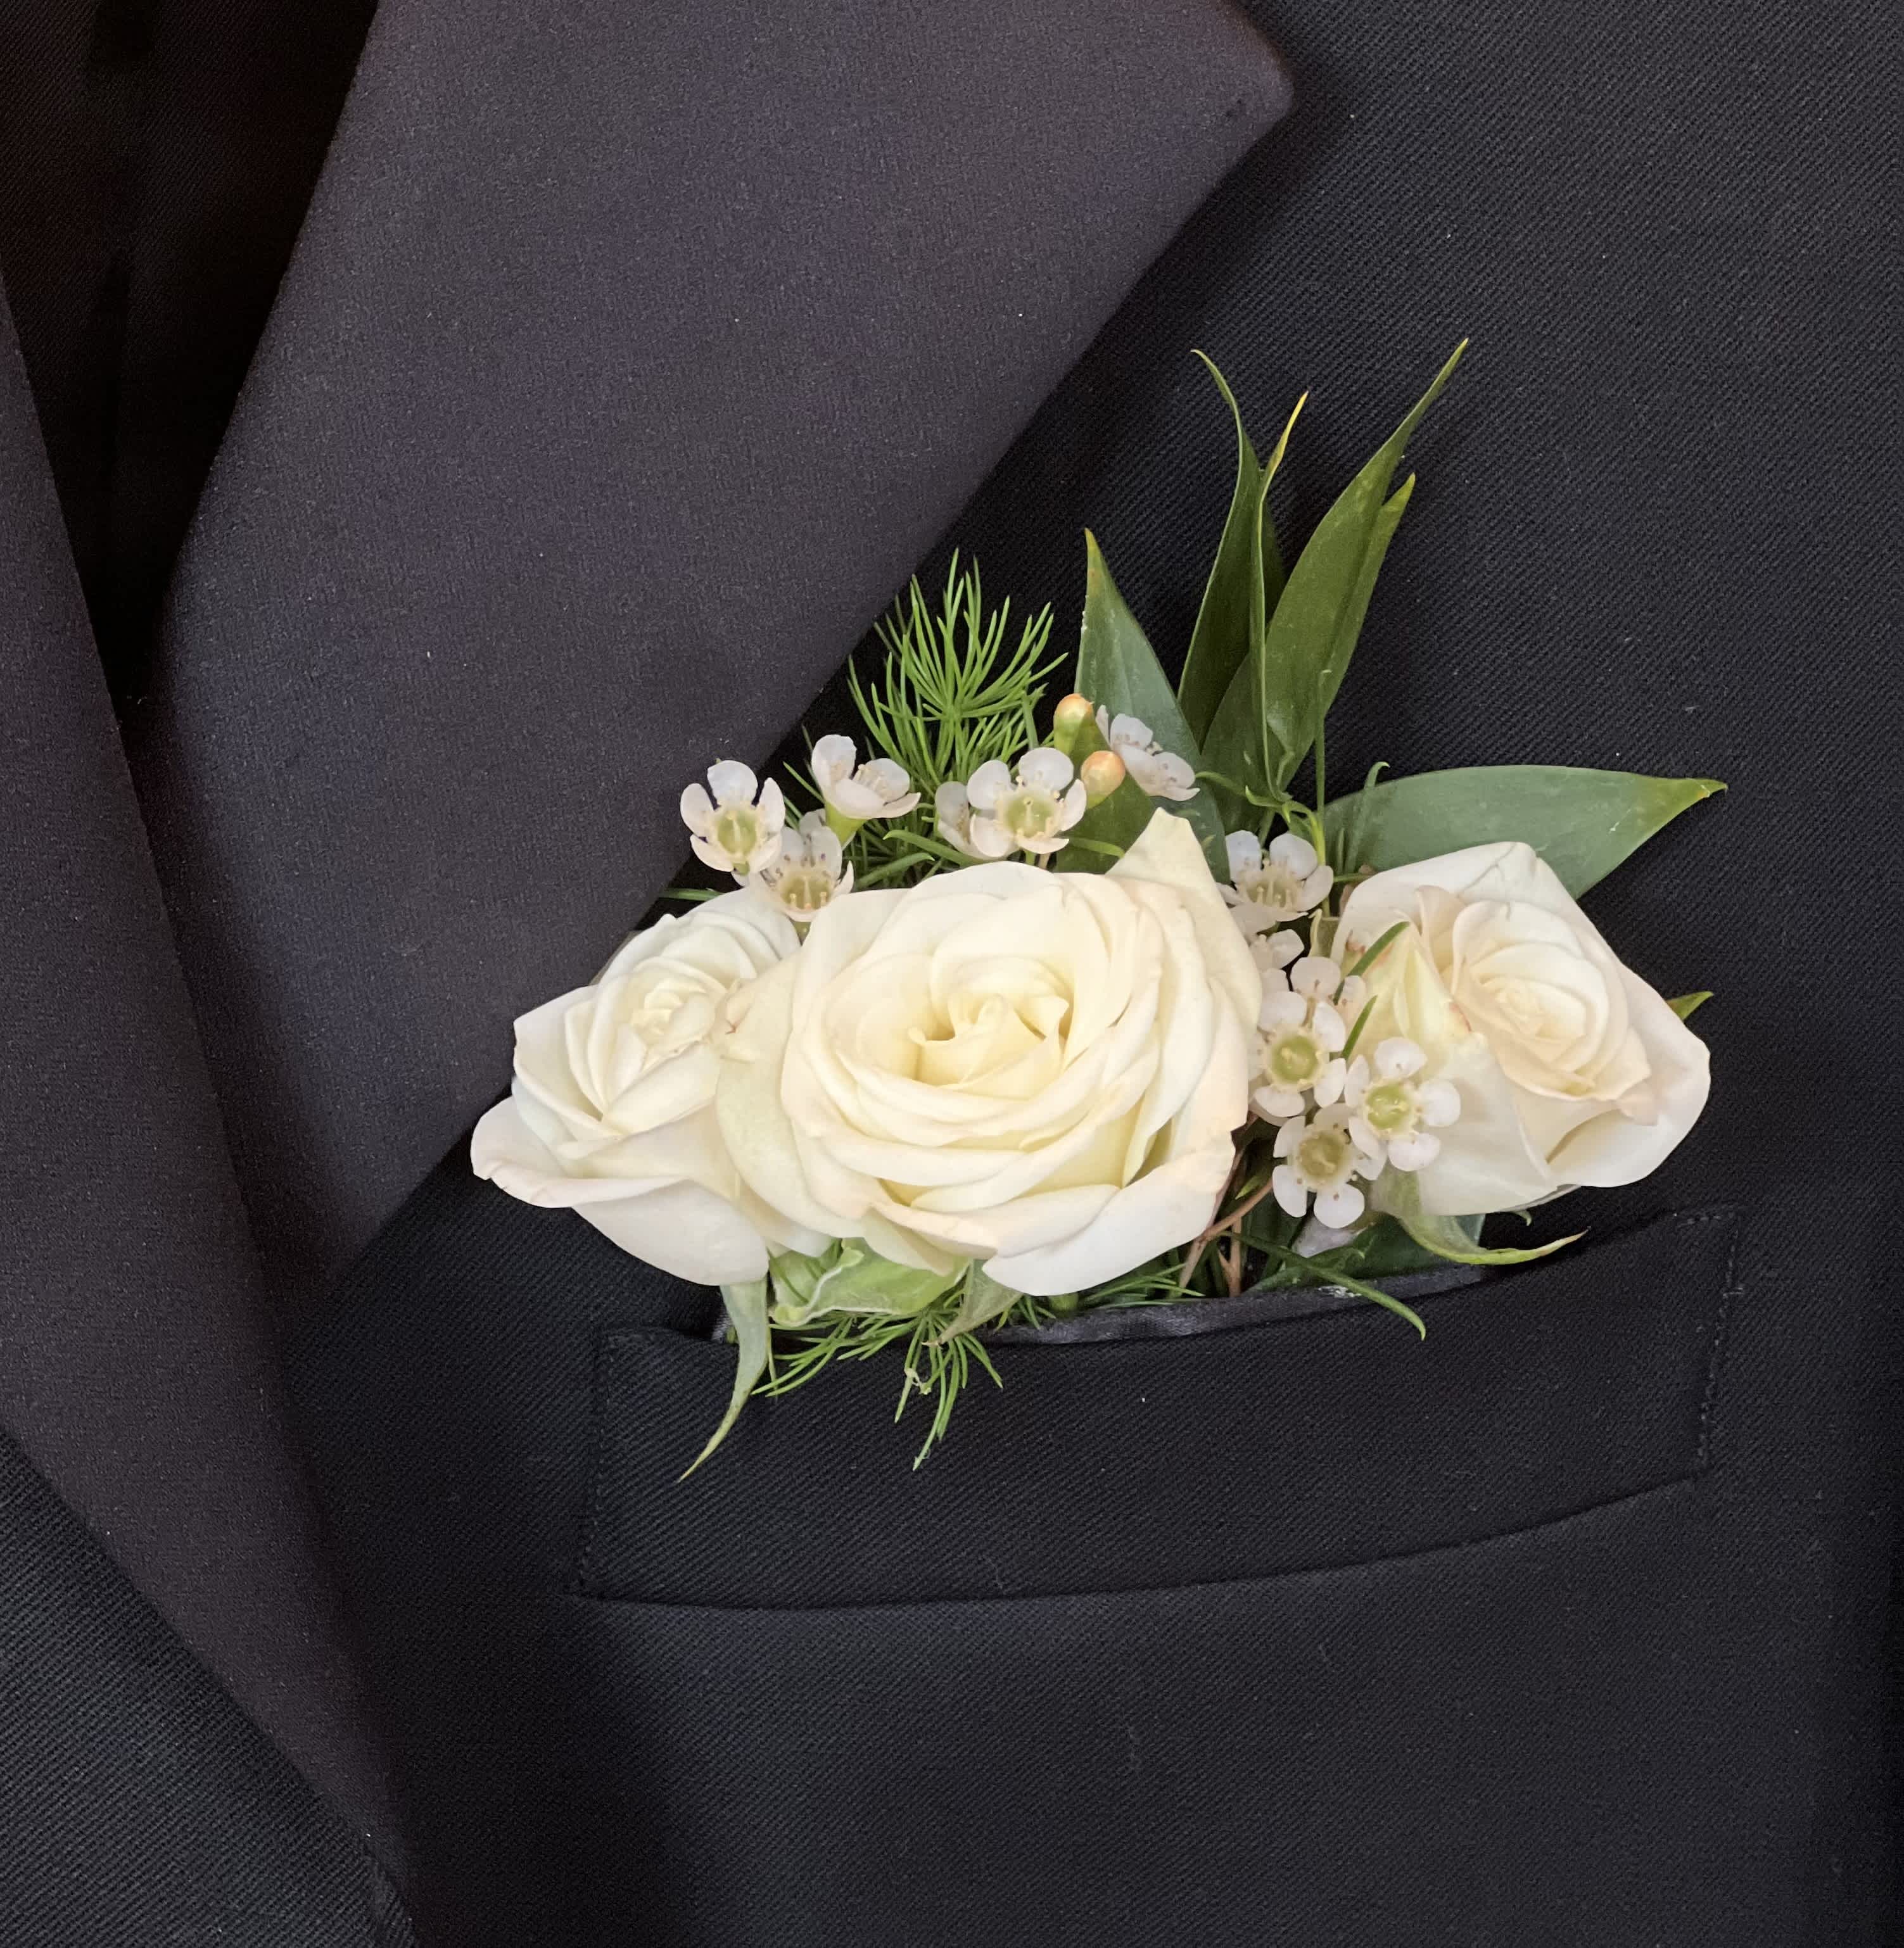 White Pocket Square - This elegant pocket square is a cool alternative to the traditional boutonniere.